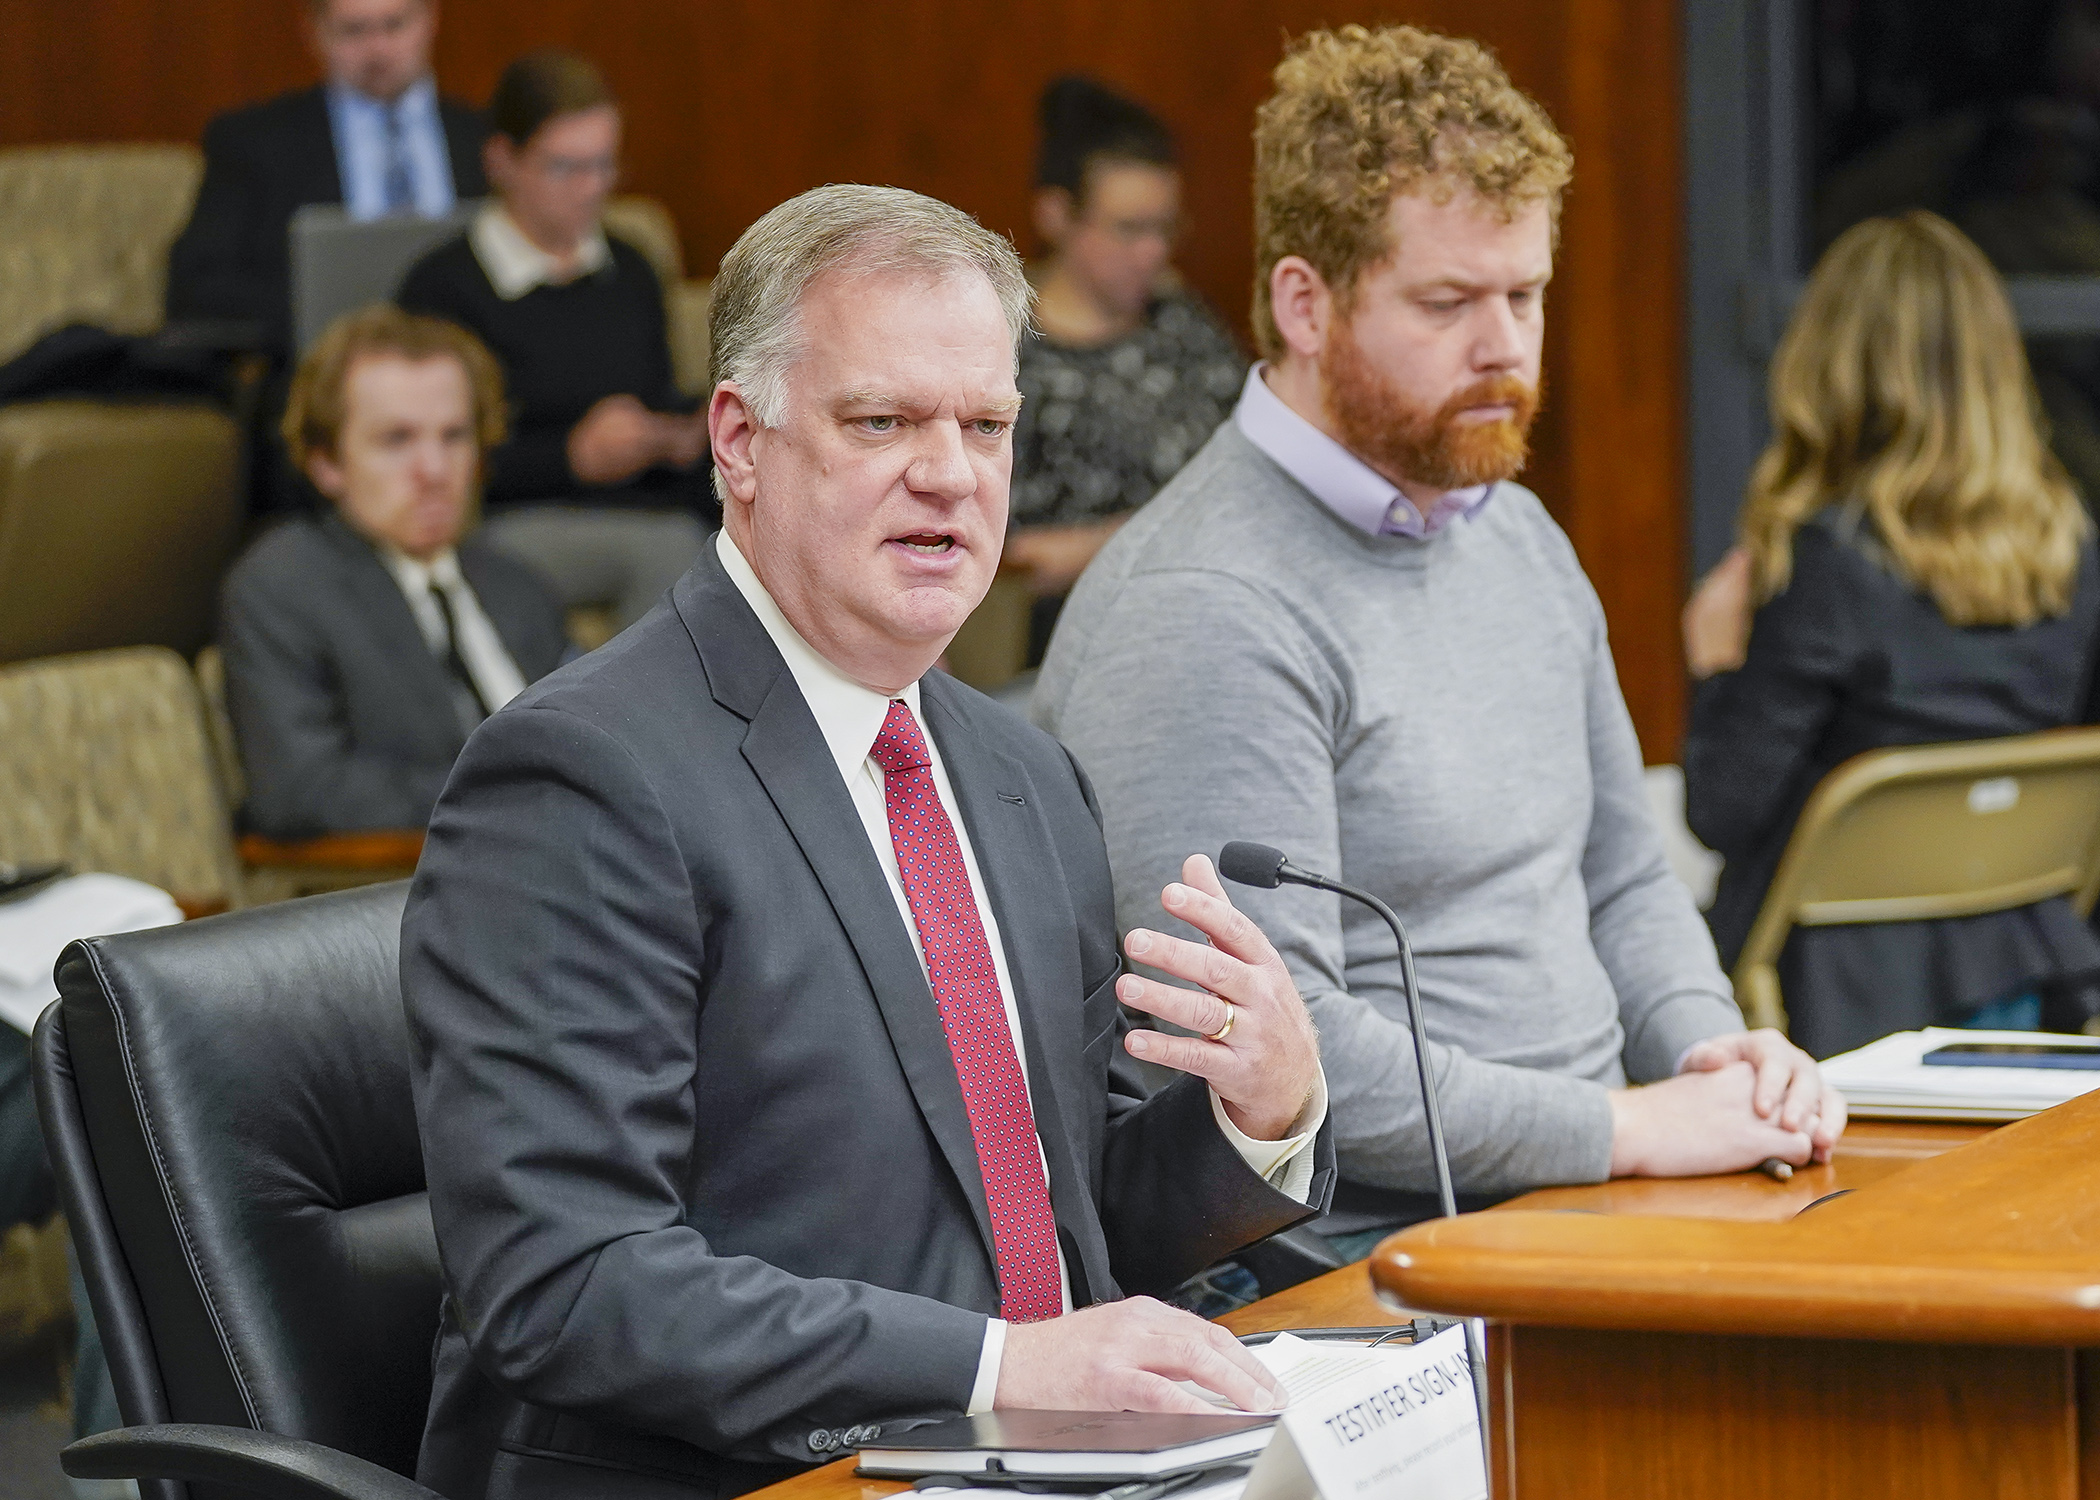 Bruce Nustad, president of the Minnesota Retailers Association, testifies Jan. 9 before the House commerce committee in support of a bill sponsored by Rep. Zack Stephenson, right, that would ban price gouging during emergencies. (Photo by Andrew VonBank)